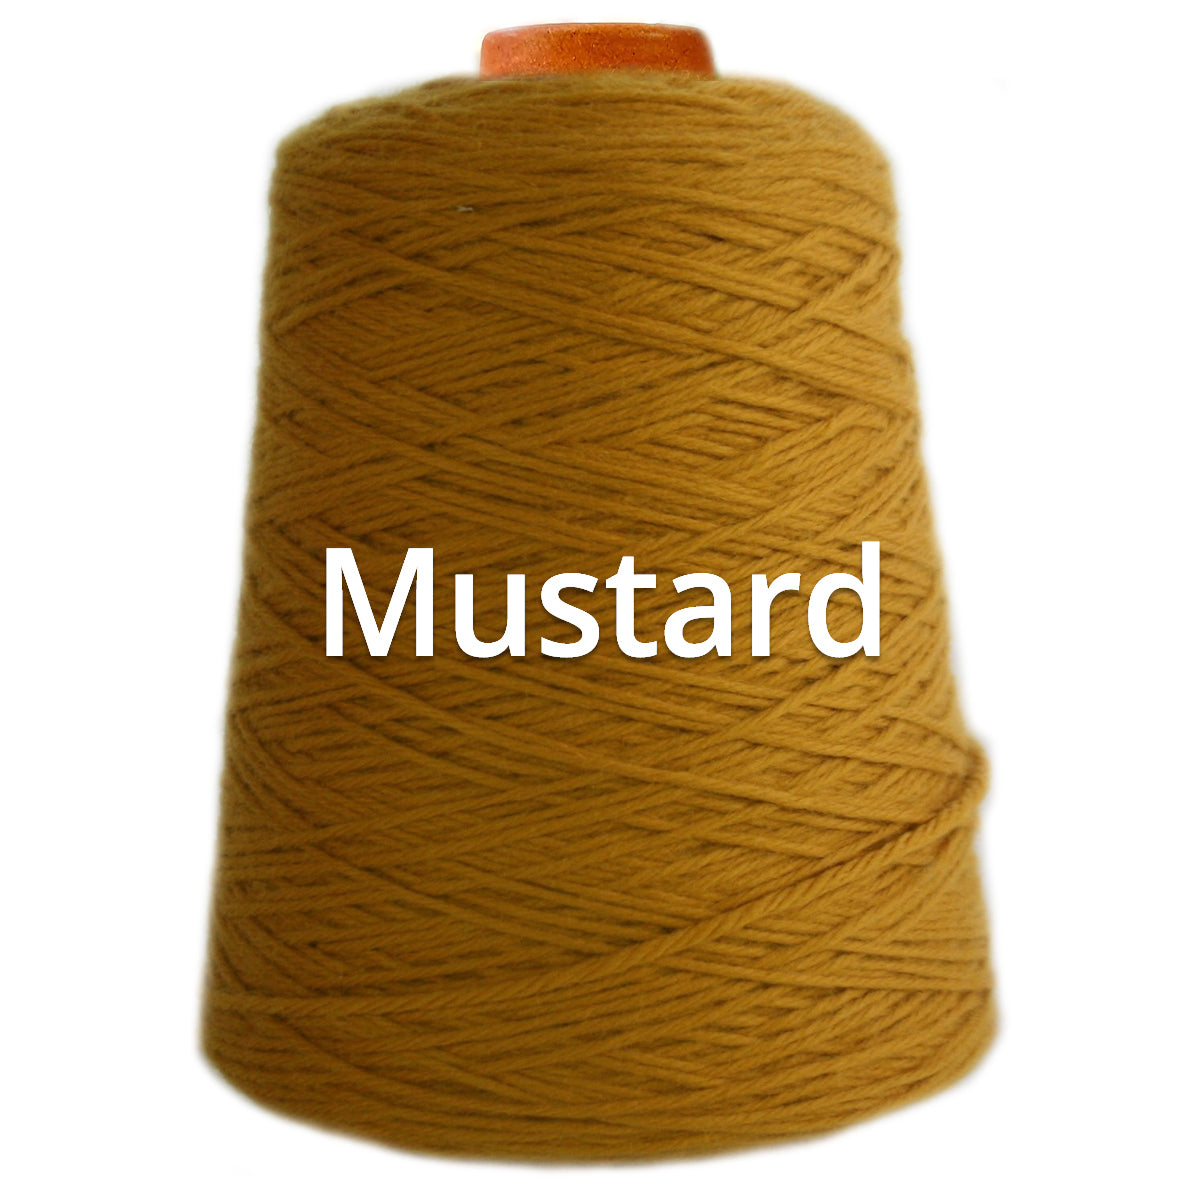 Mustard - Nundle Collection - 4 Ply Sock Yarn 400g Cone